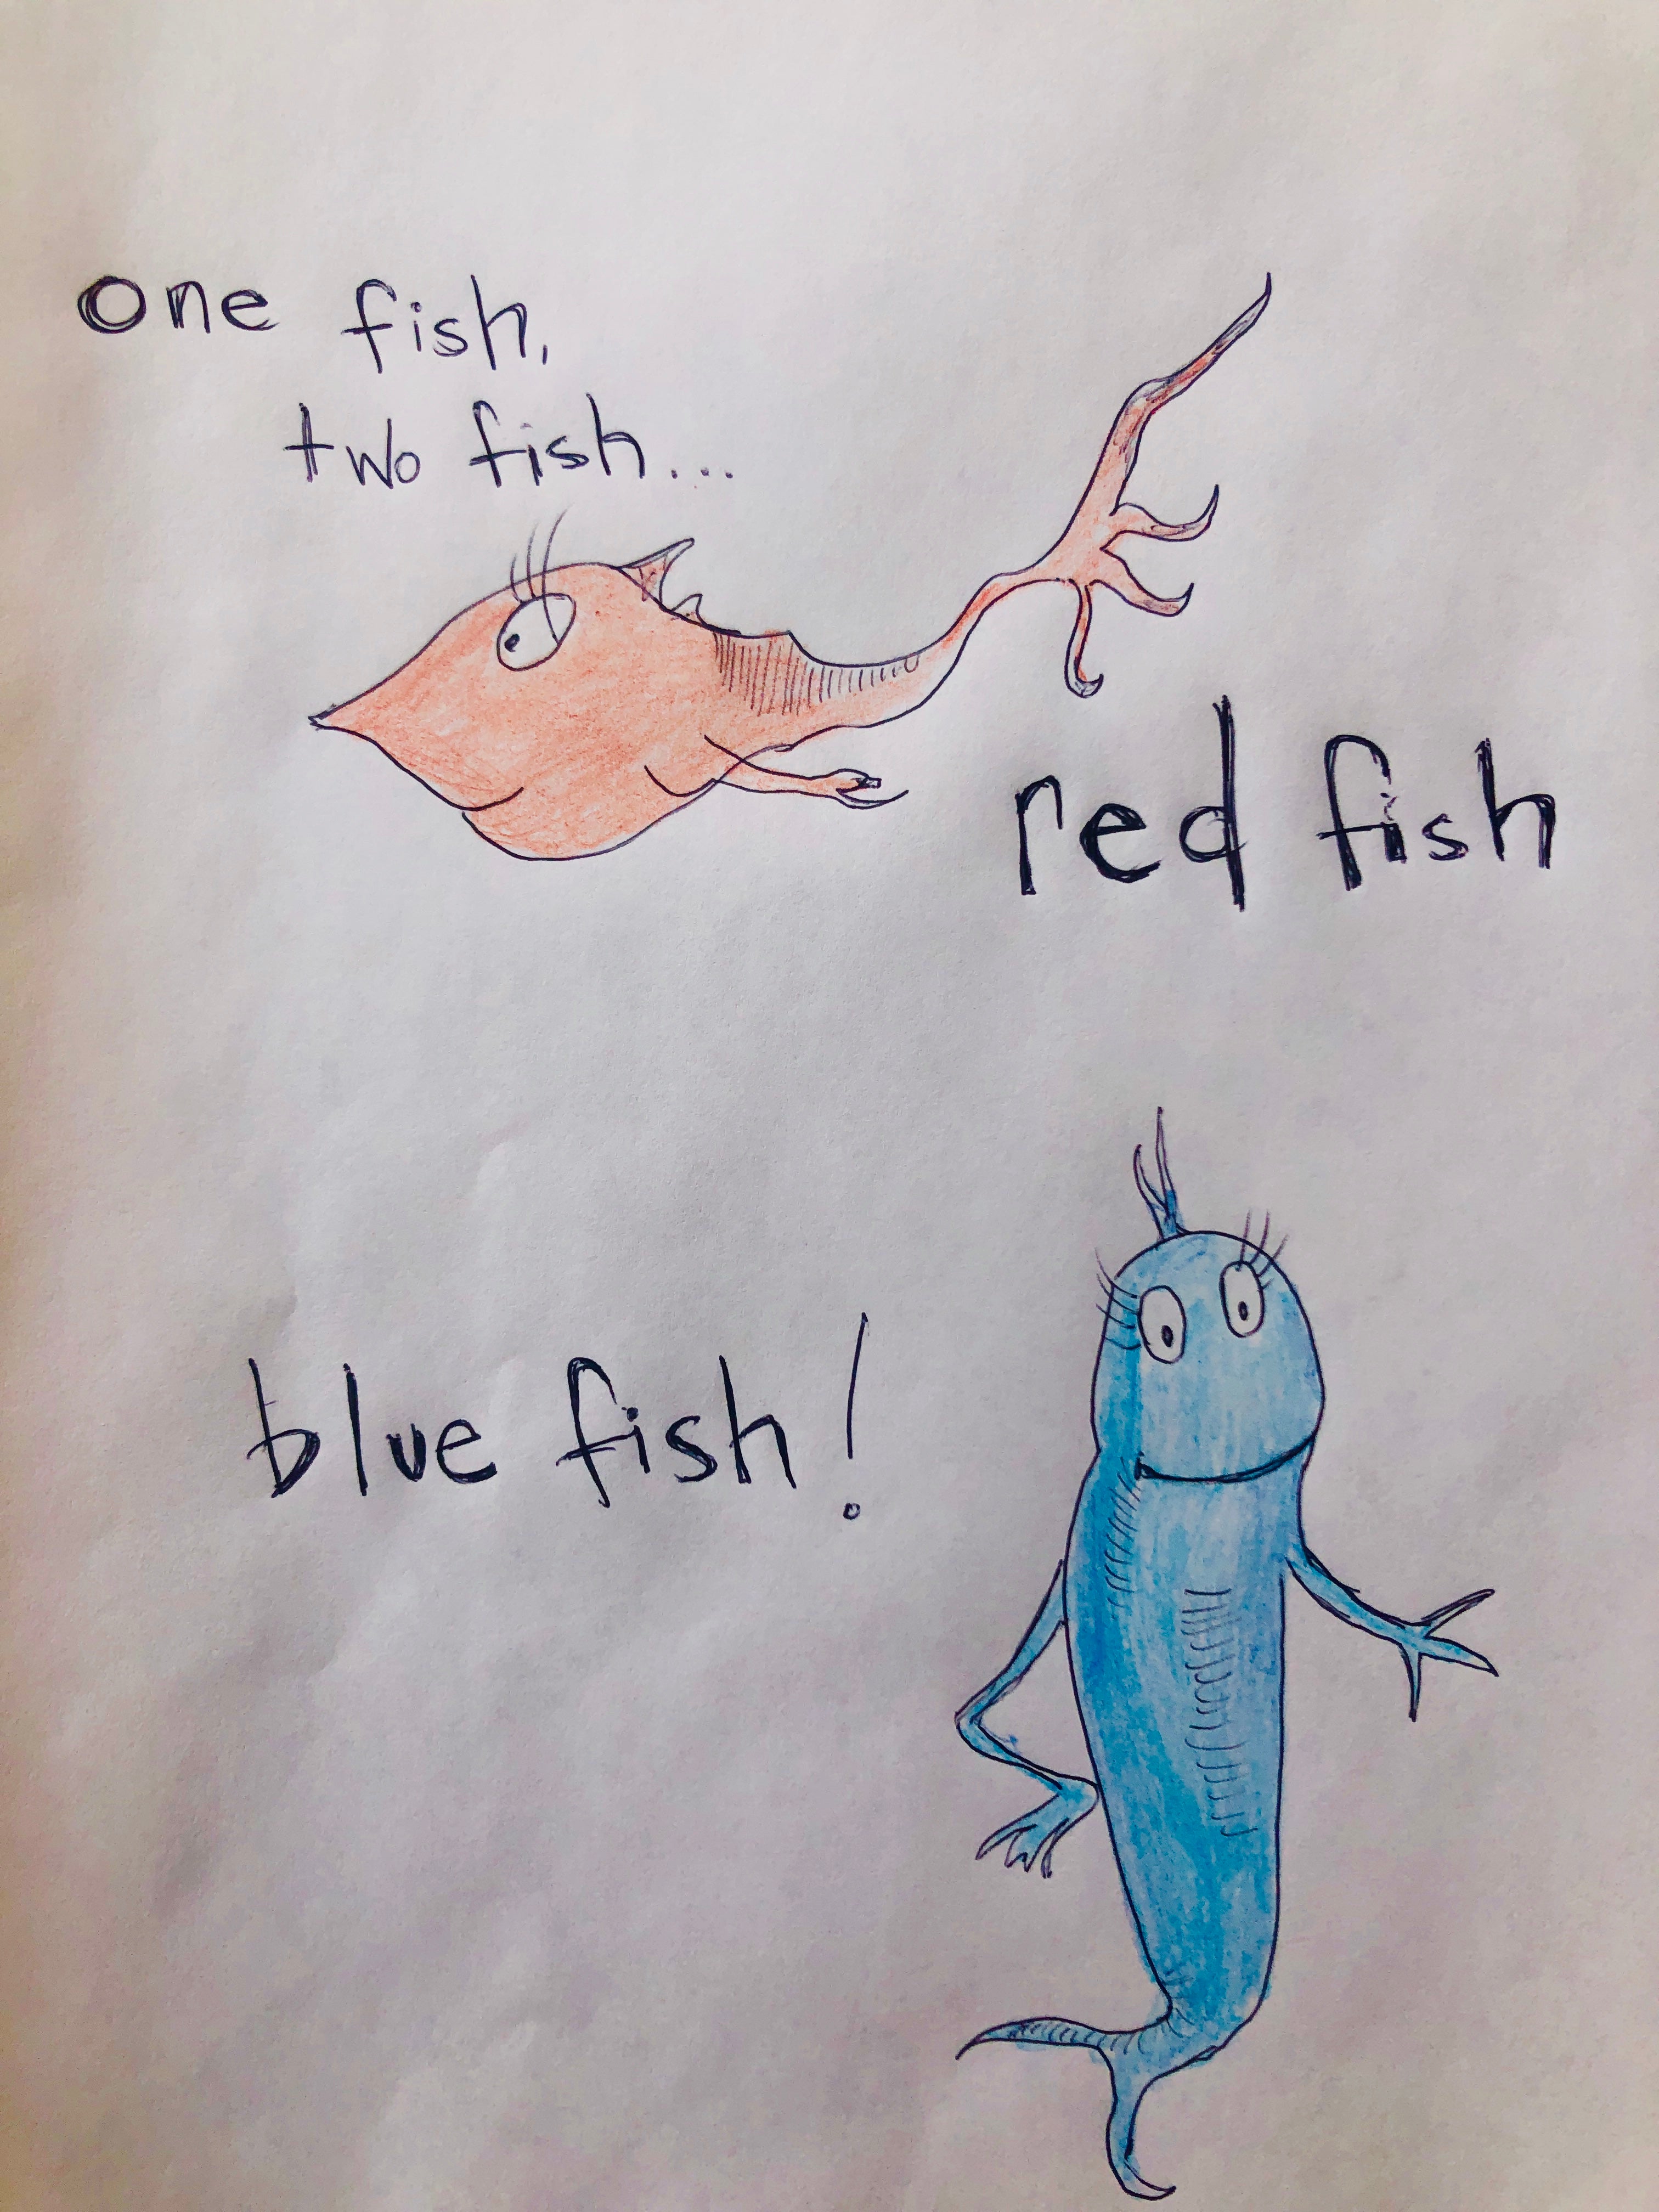 One Fish, Two Fish, Red Fish, Blue Fish. – Family Dinner